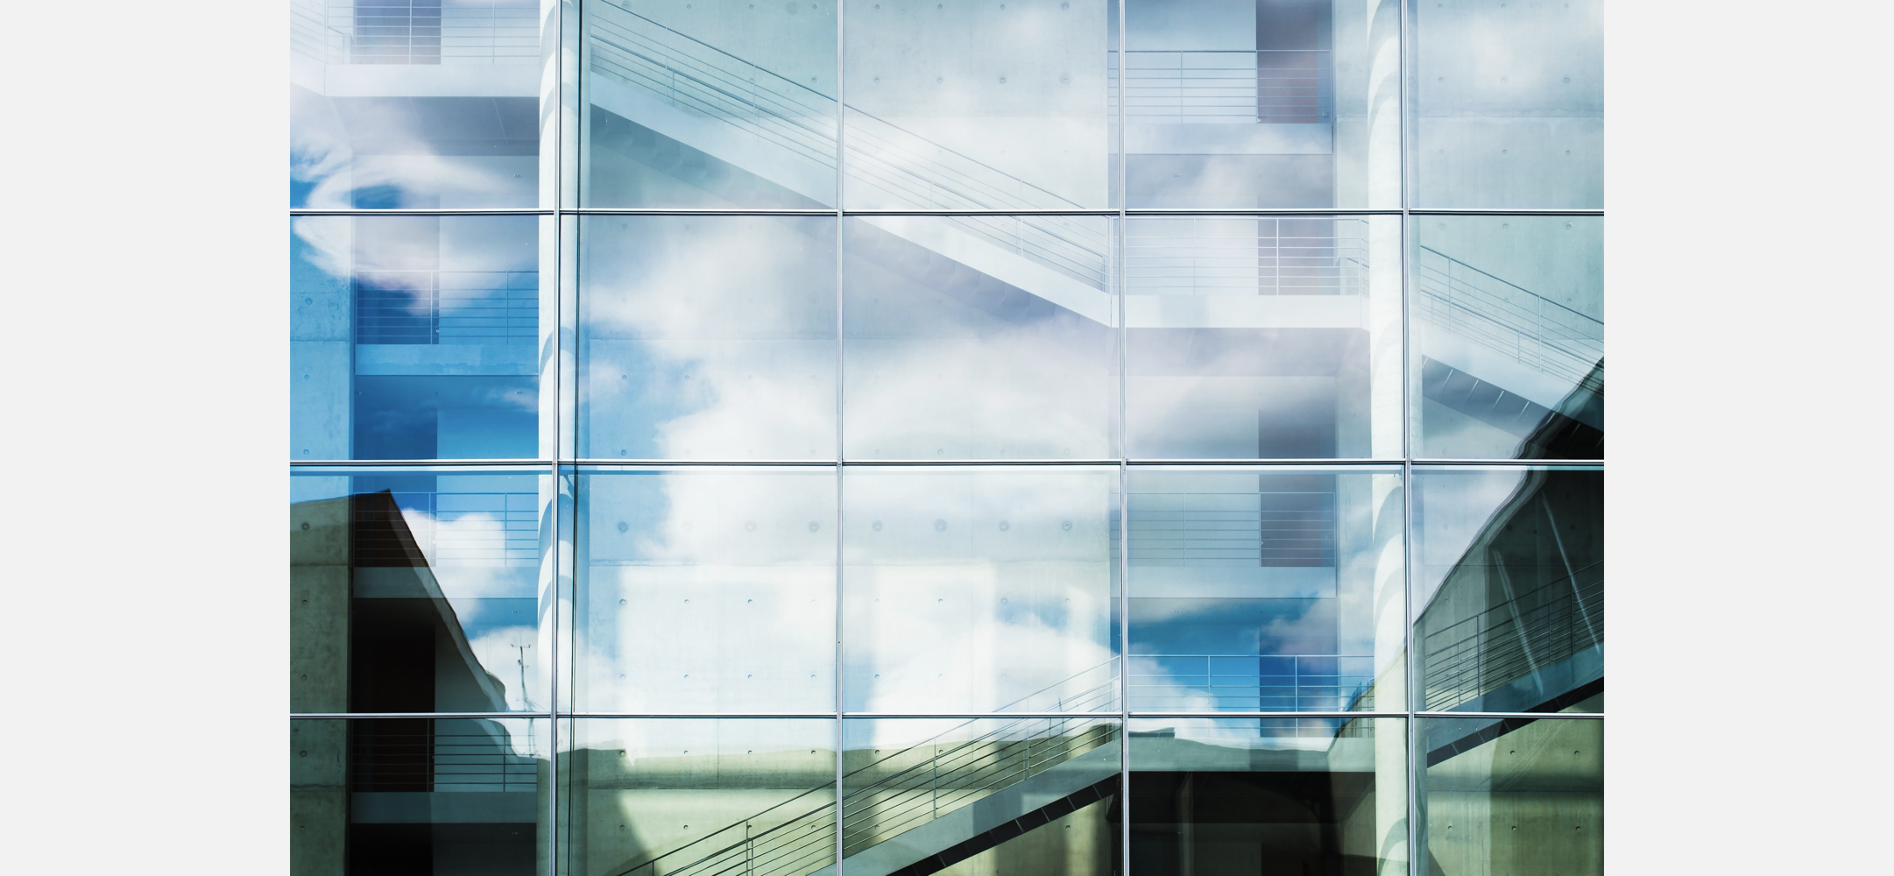 Building Glass Facade From Unsplash by Michael (@polygonglider)